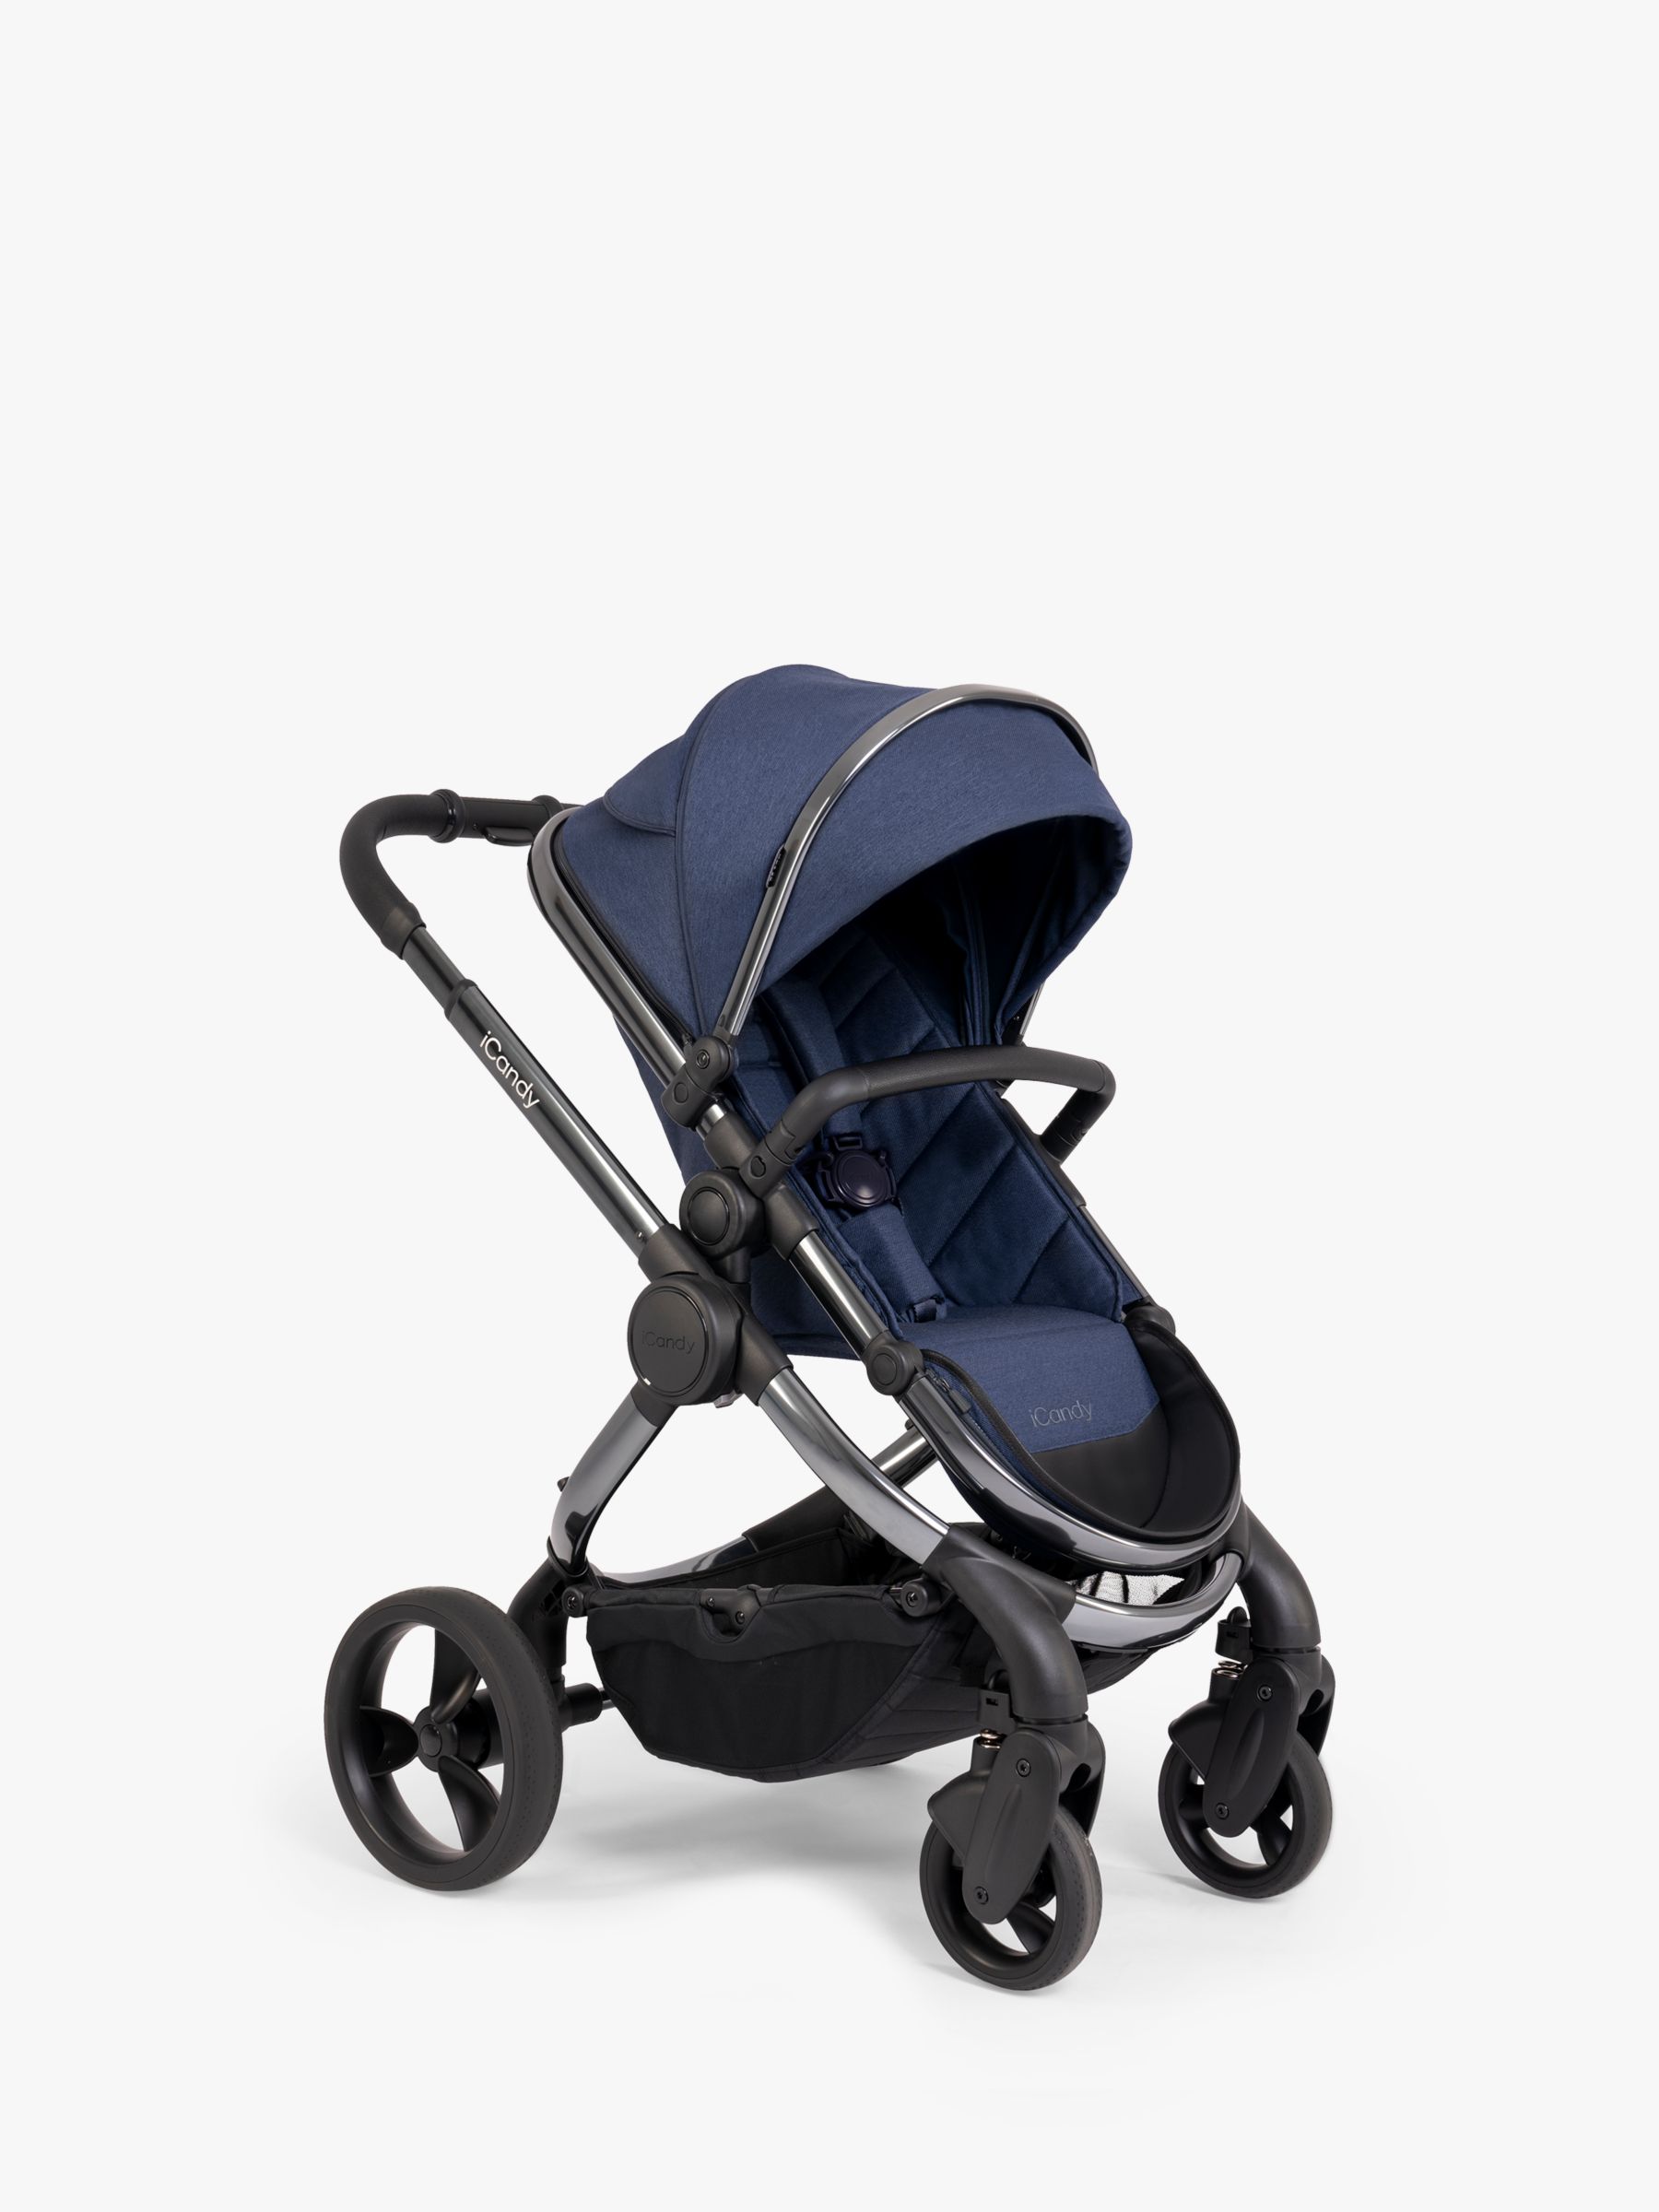 IC2383 iCandy Peach Phantom Navy Check Pushchair & Carrycot Set with Bag